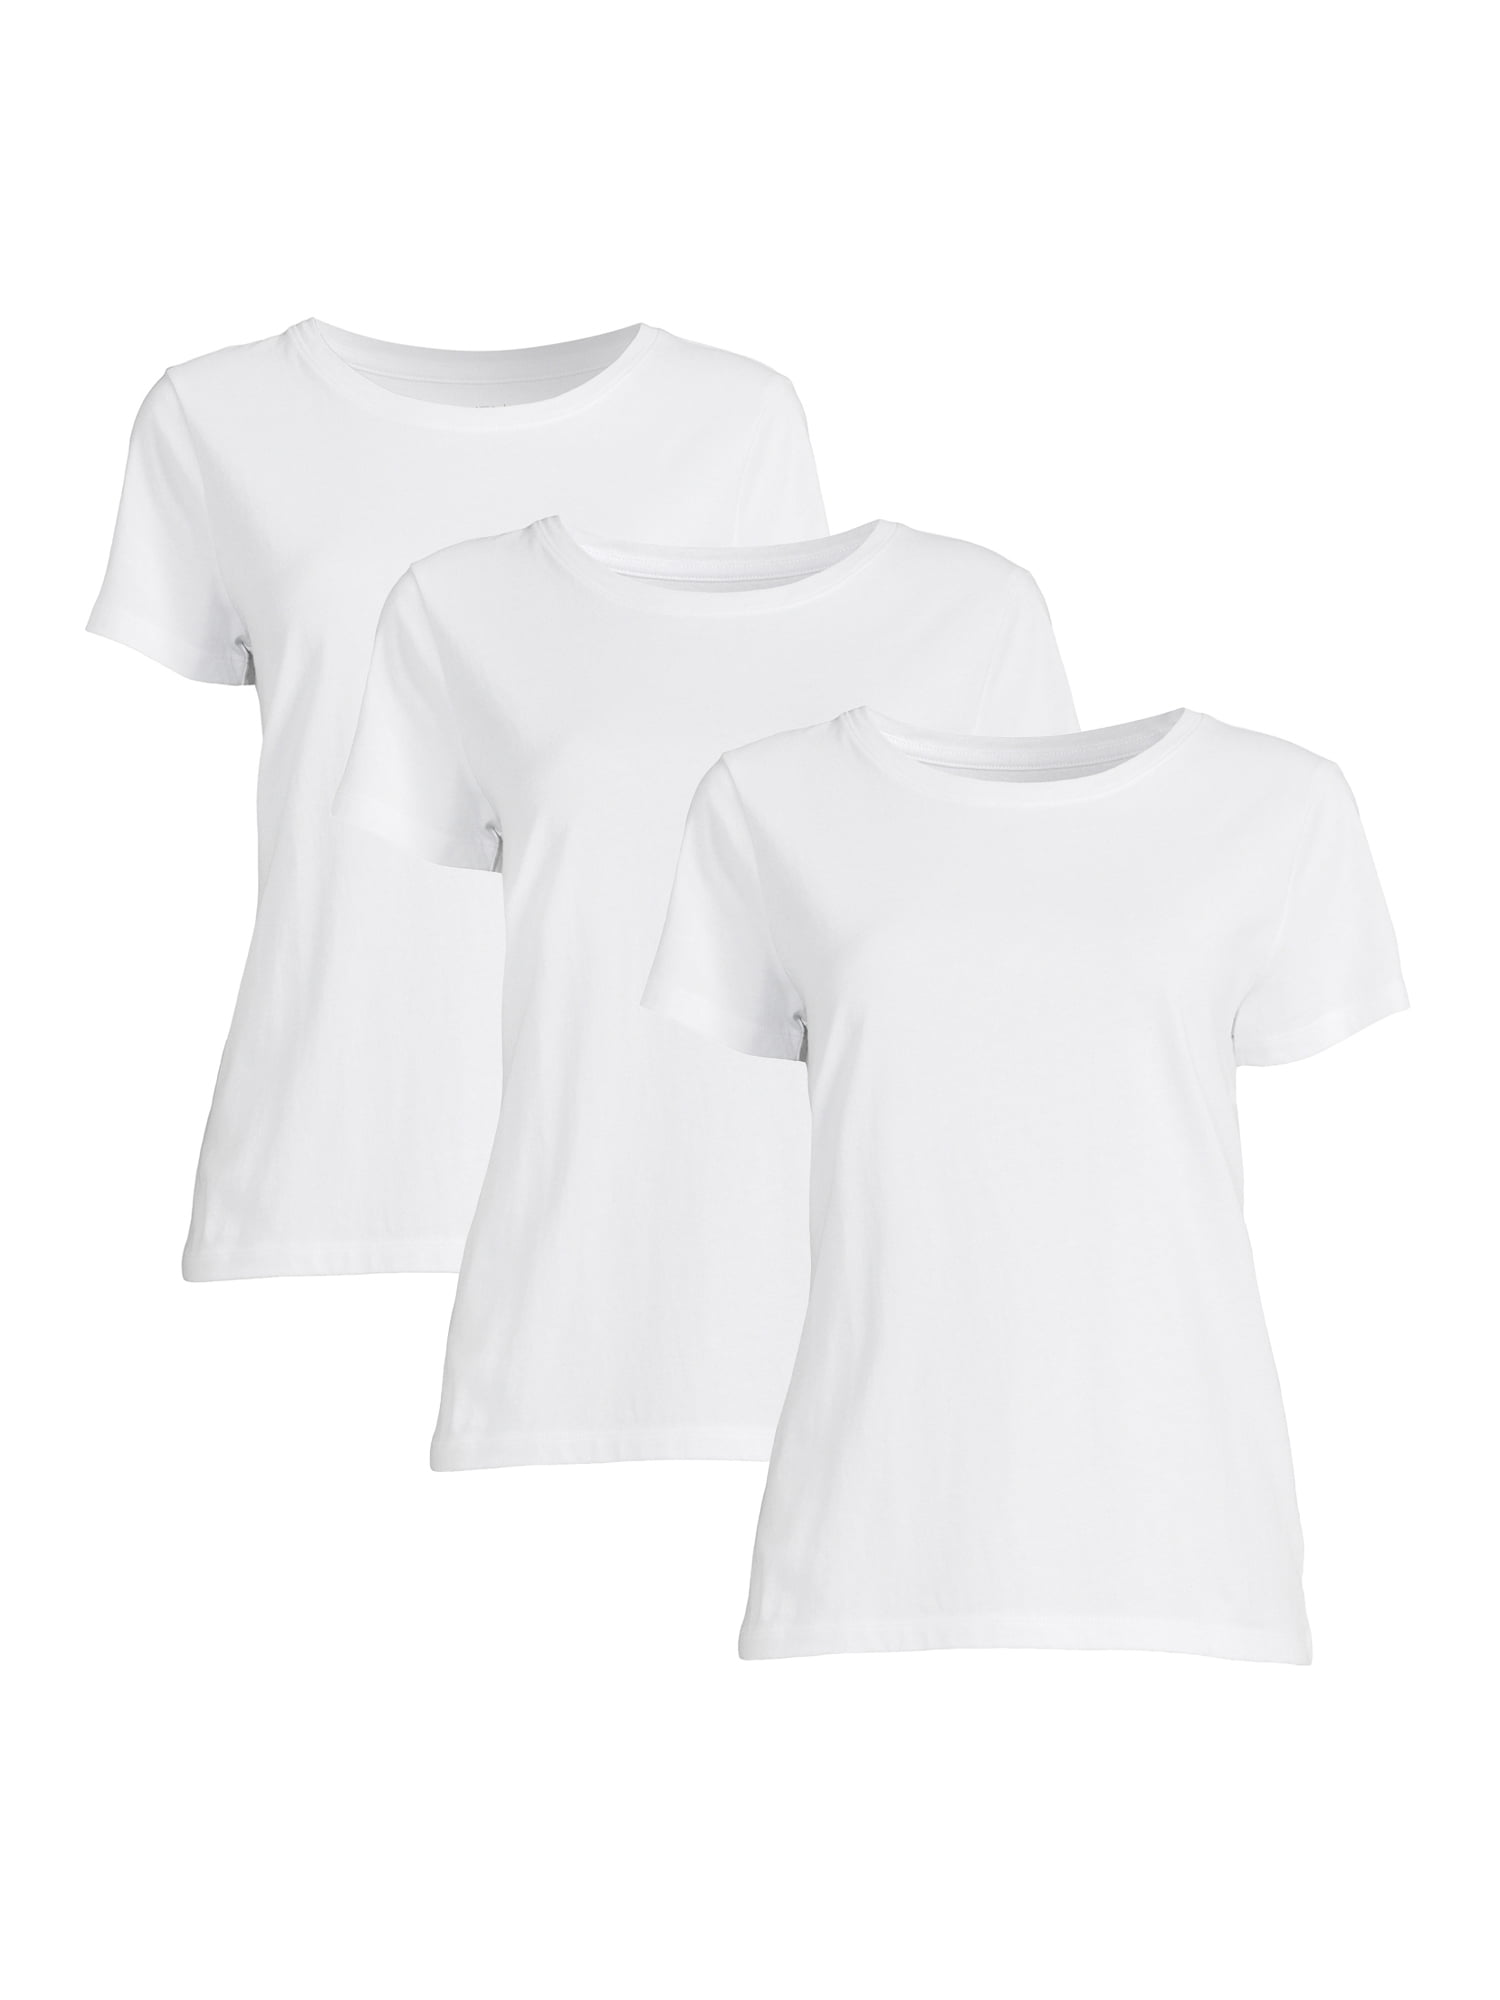 Time and Tru Women's Short Sleeve Crew Neck Tee, 3-Pack, Sizes S-3X ...